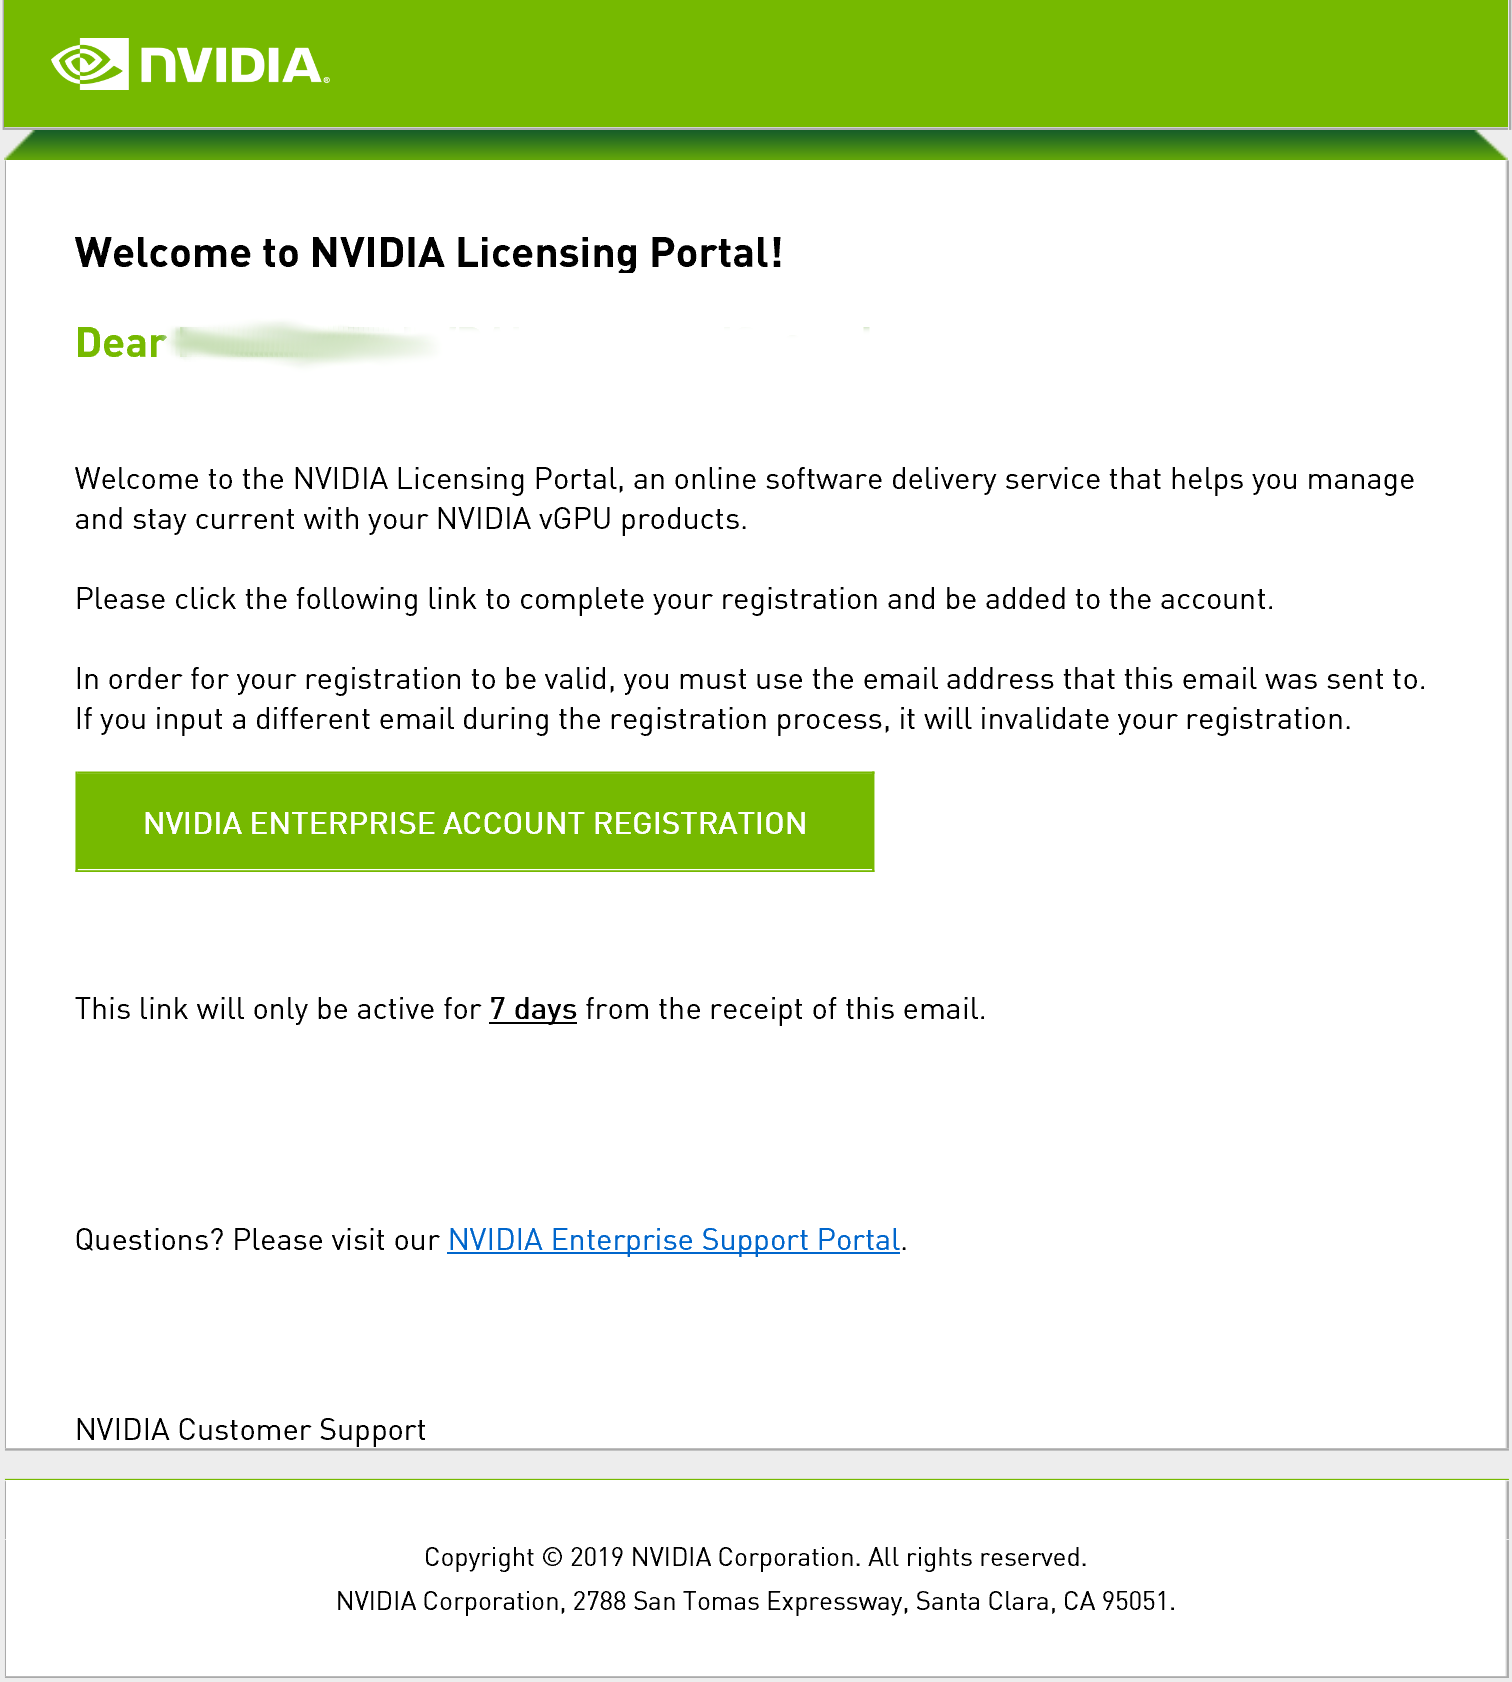 Screen capture showing the e-mail that is sent to a user who has been added to the NVIDIA Licensing Portal.